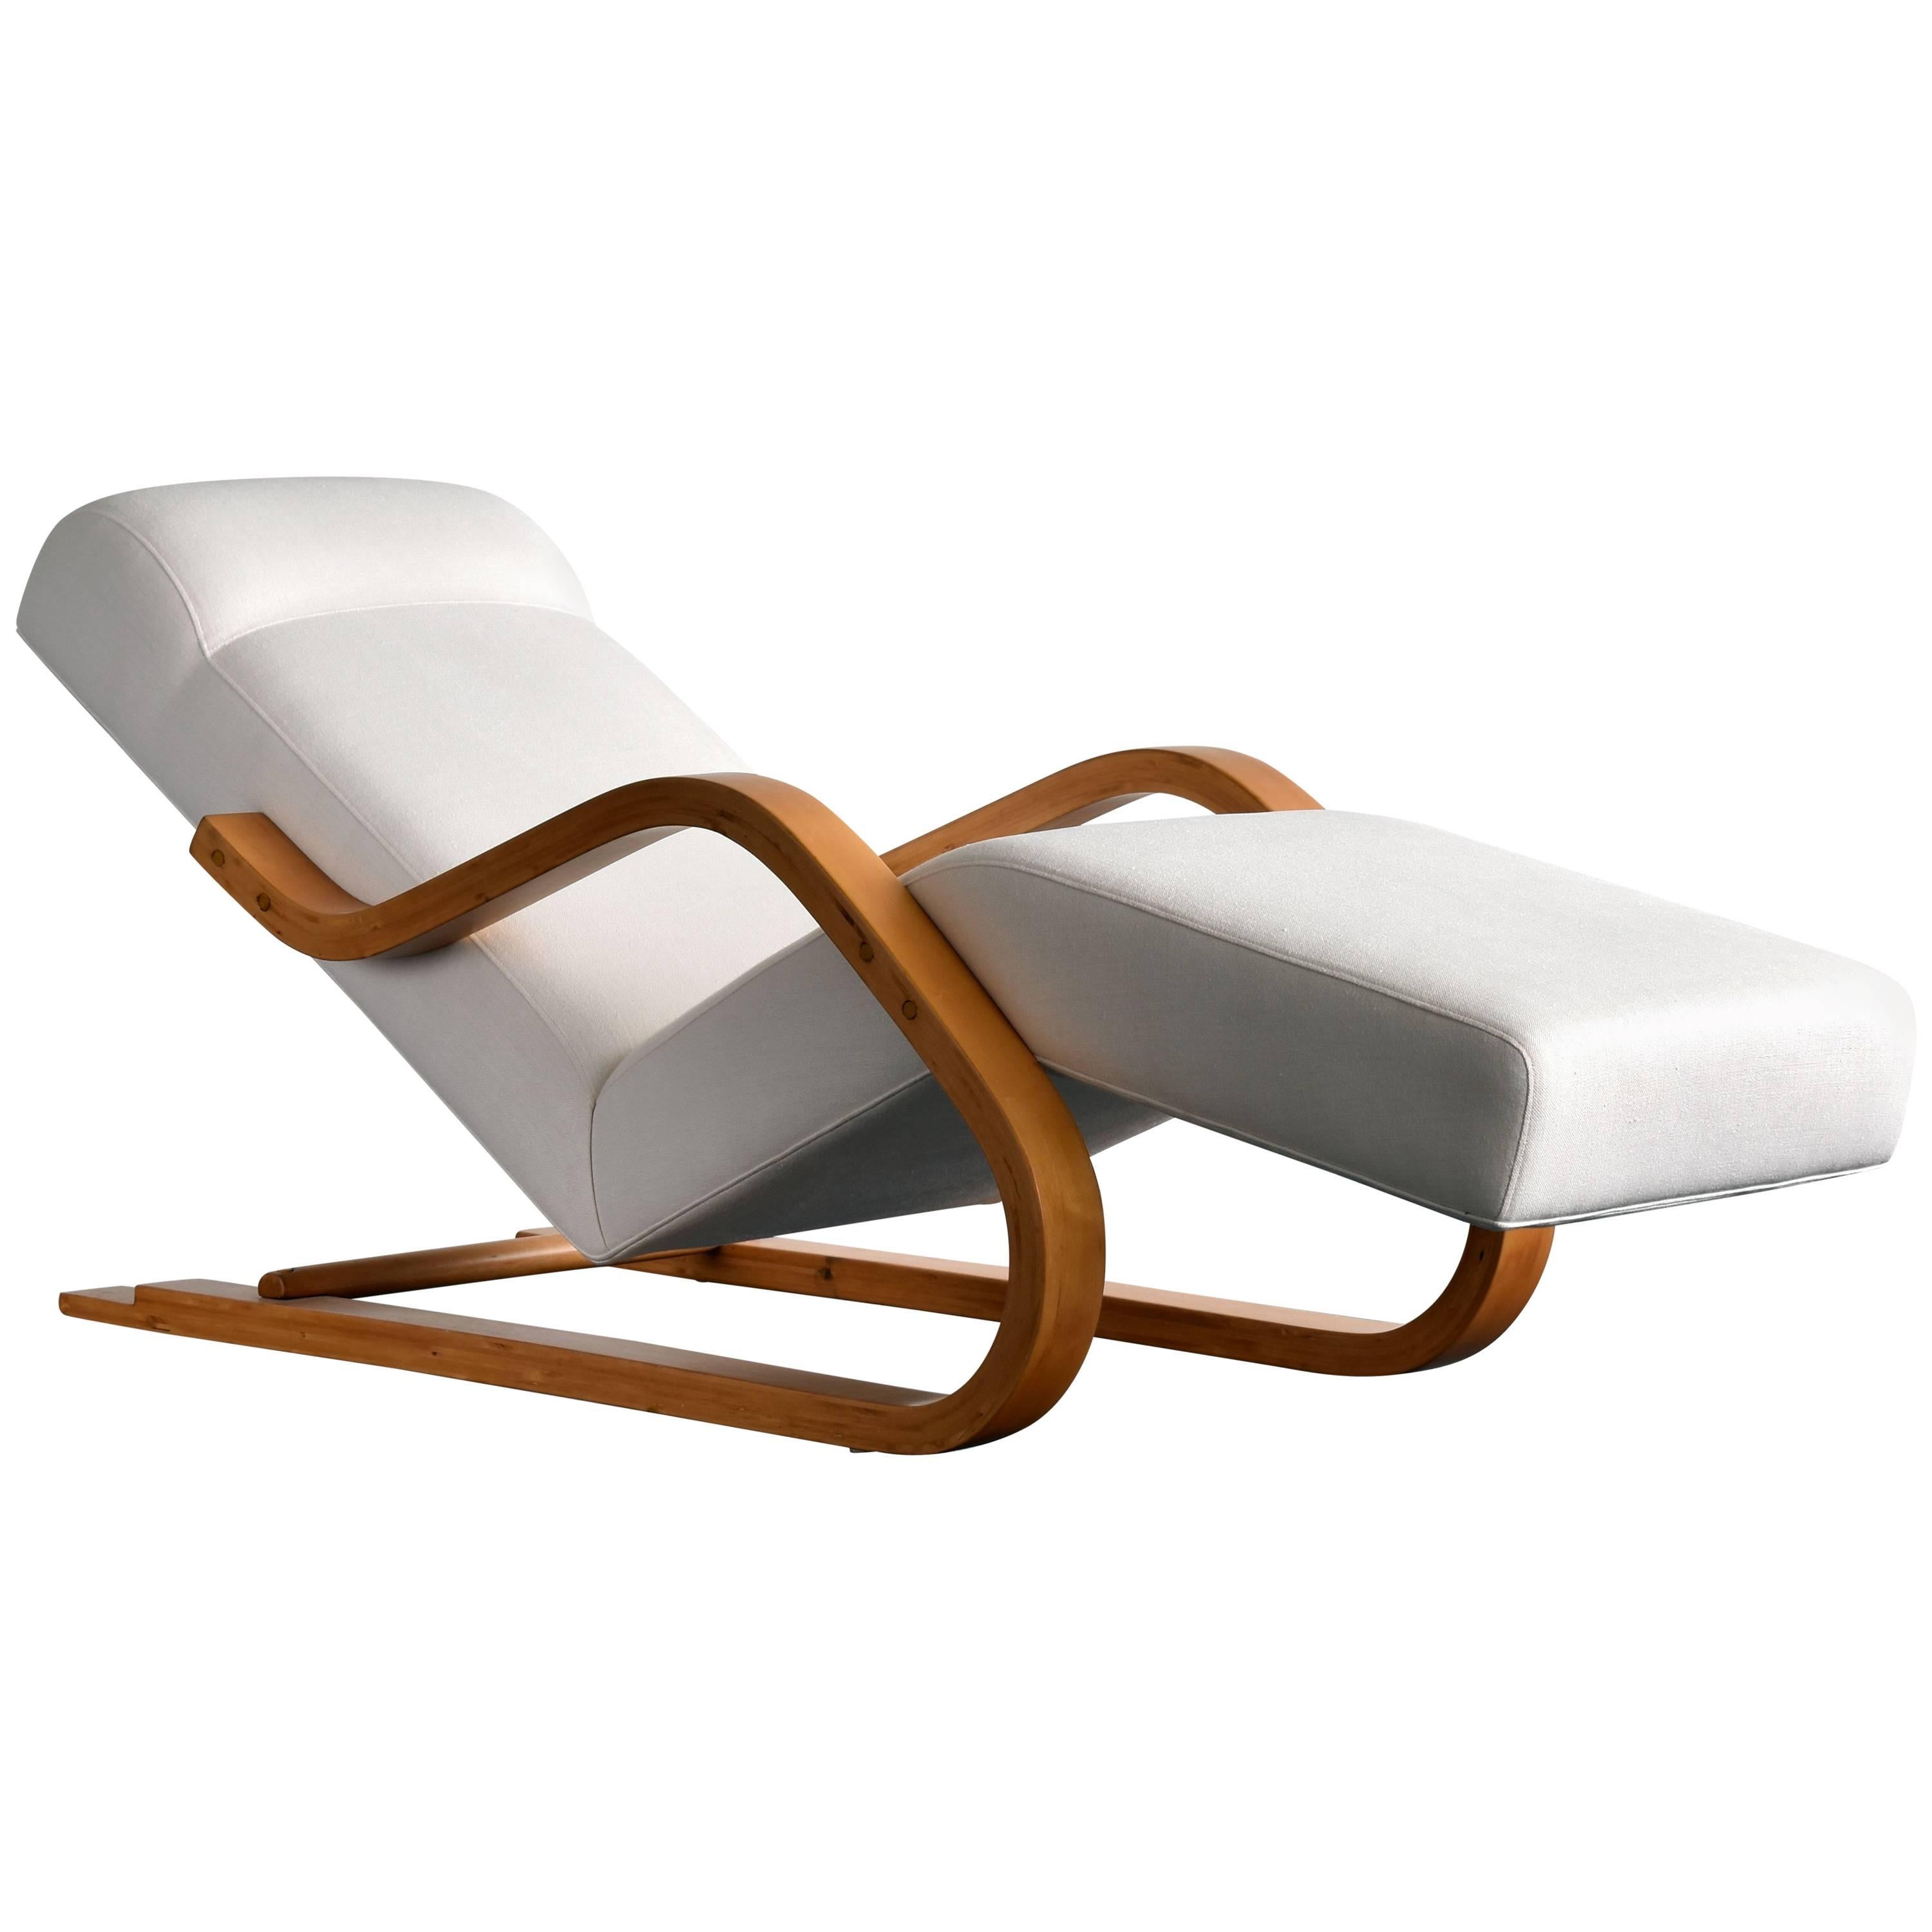 Alvar Aalto, Early and Rare Cantilevered Chaise in White Fabric, circa 1937